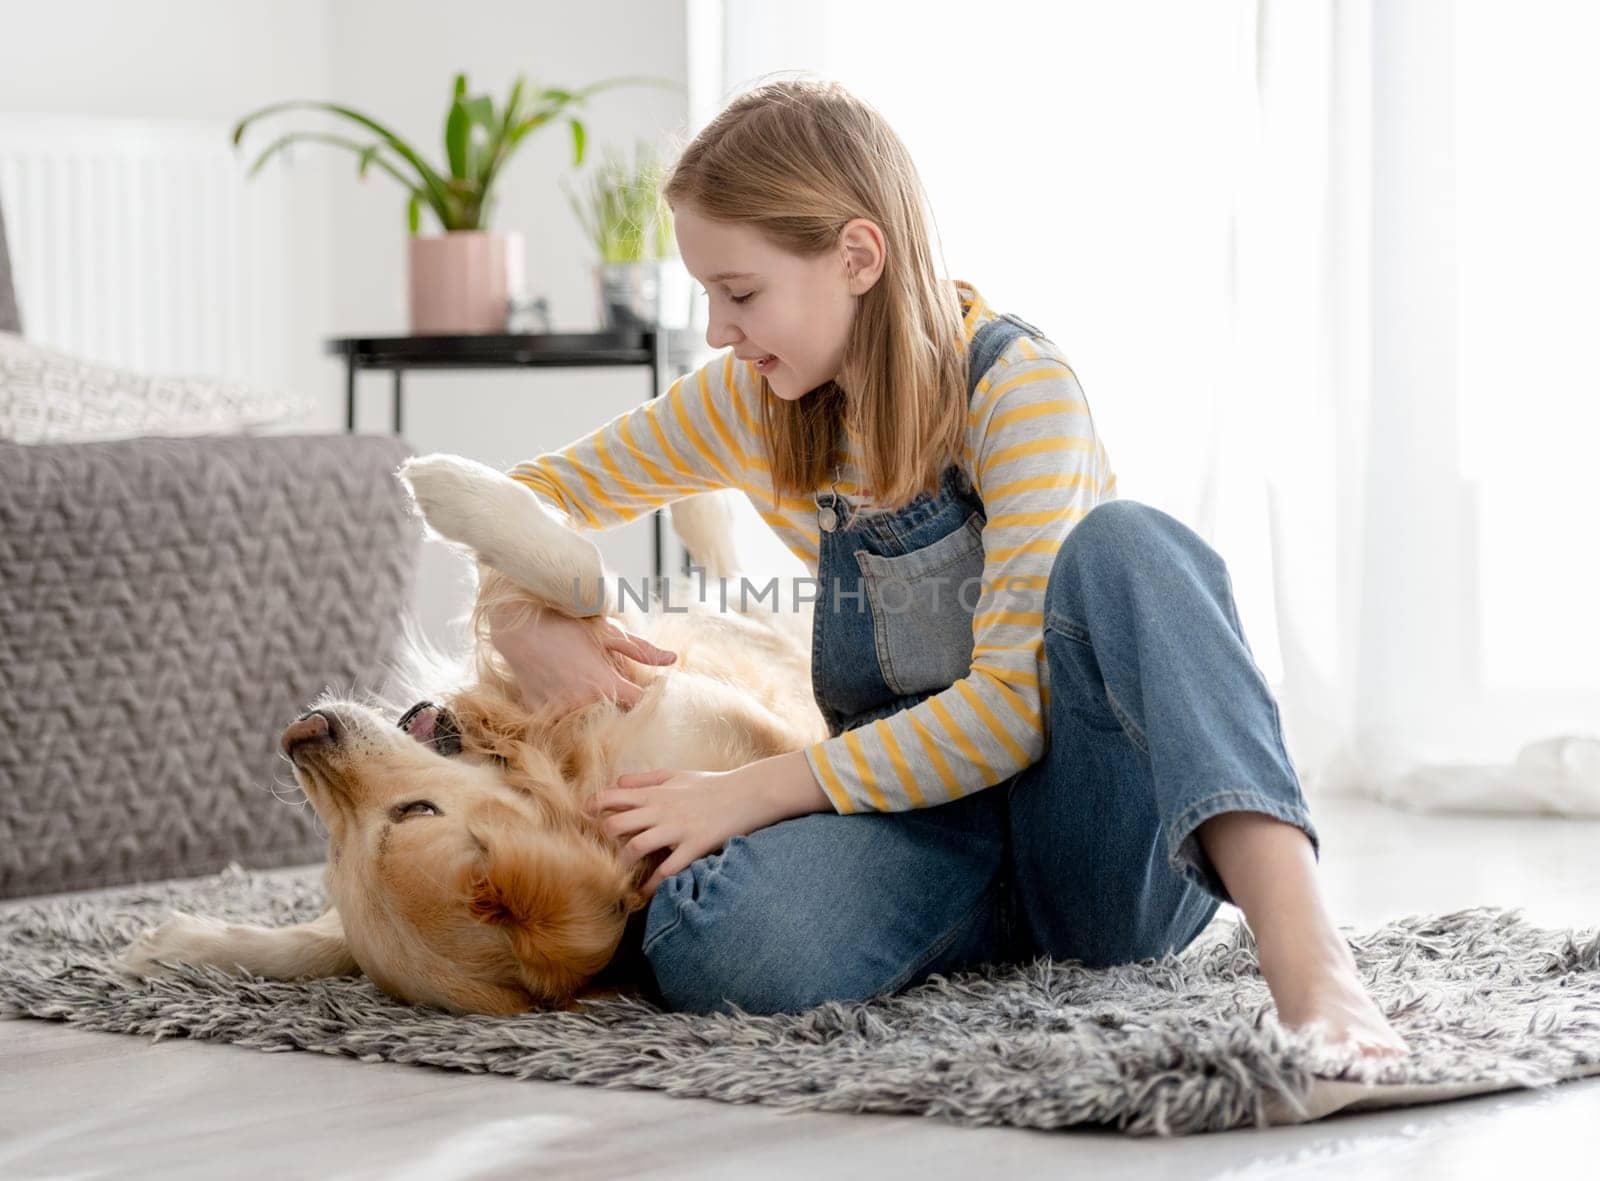 Girl Plays With Golden Retriever On Room Floor In Dog Game